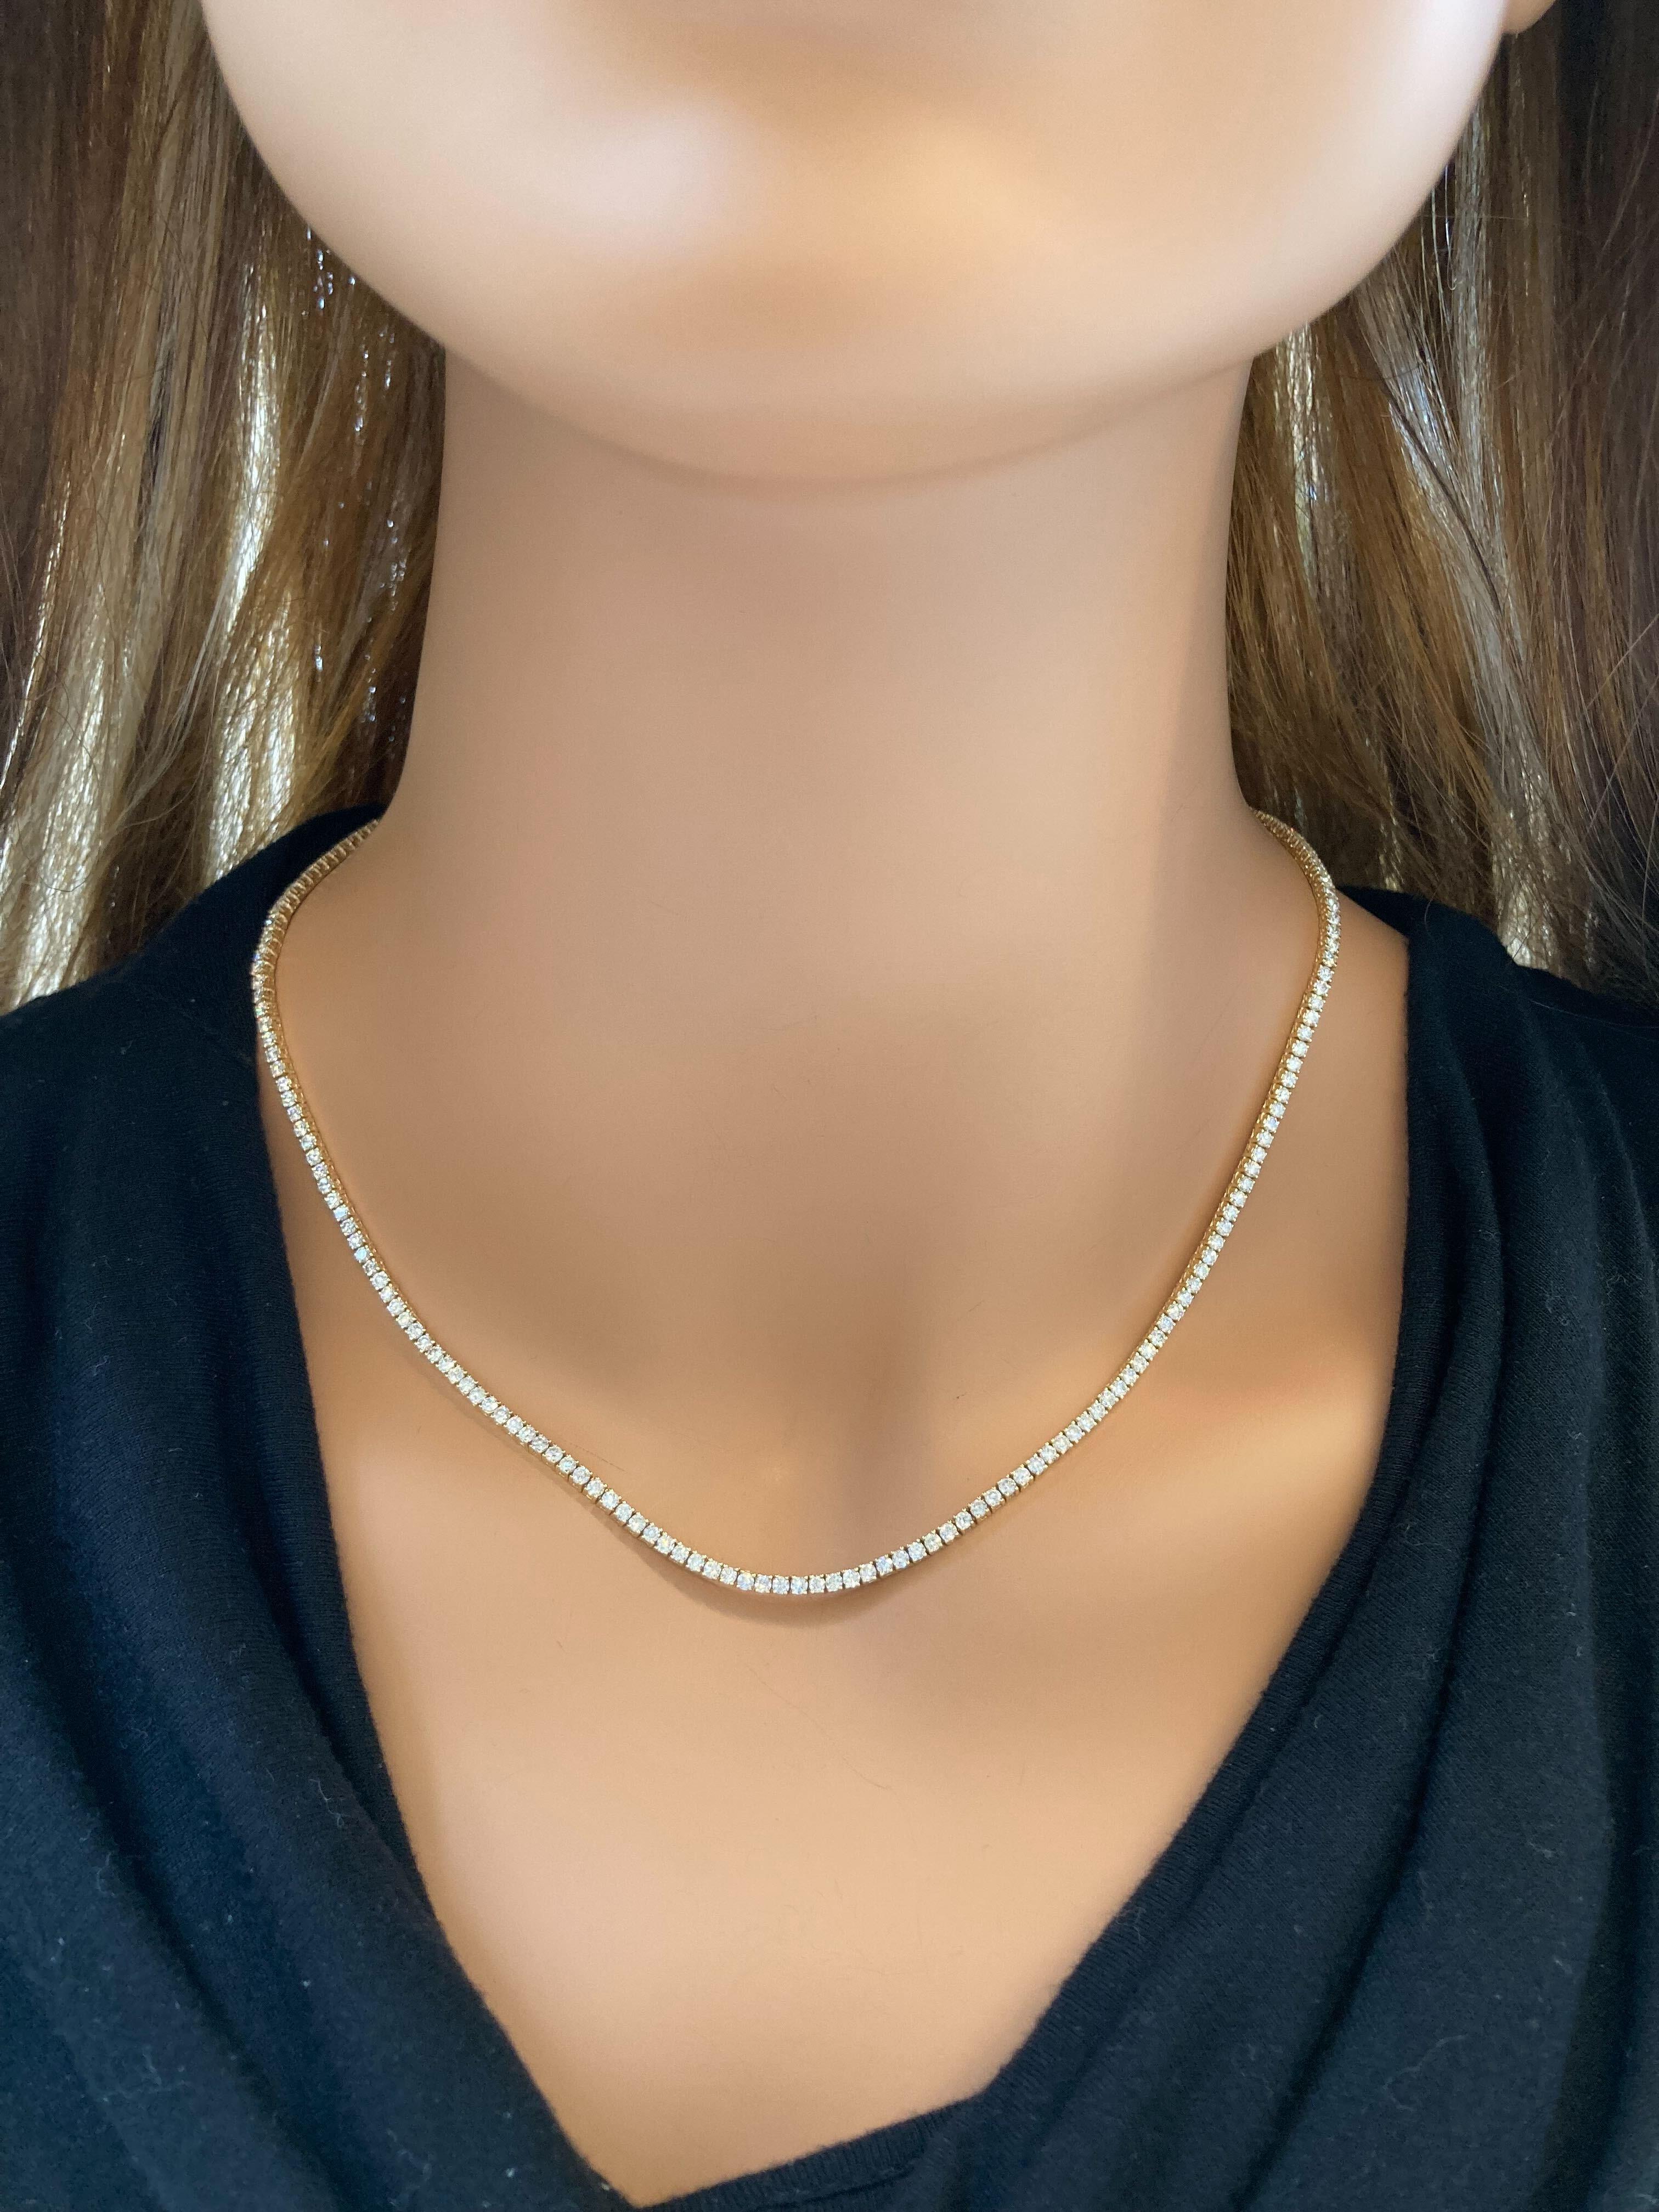 Contemporary 7.00 Carat Round Diamond Tennis Necklaces In 14k Yellow Gold For Sale